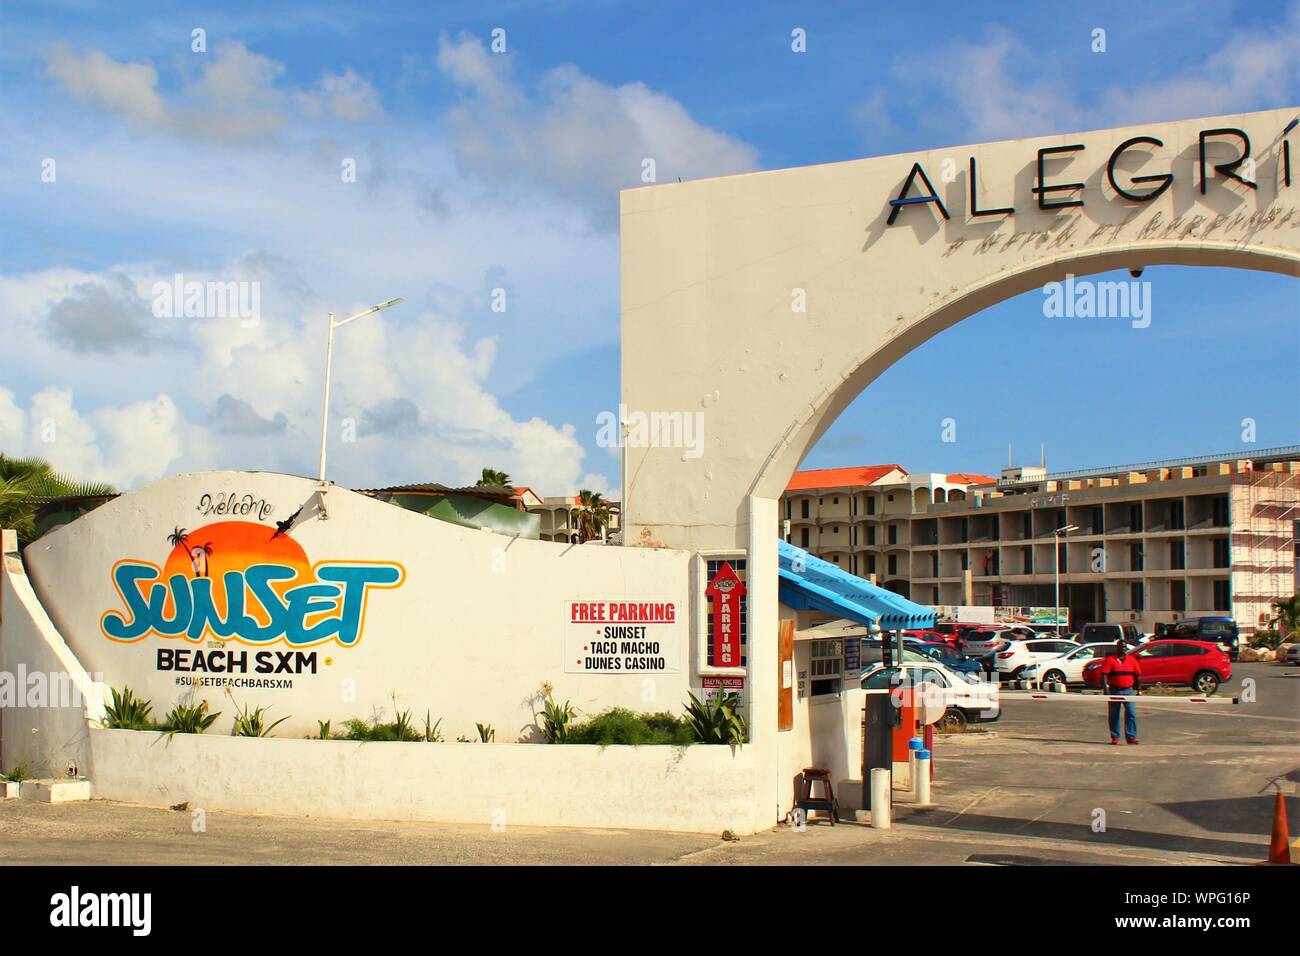 Entrance to the car park for the 'Sunset Beach SXM' beach bar, popular with tourists & plane-spotters, due to its location by SXM airport, St Maarten. Stock Photo